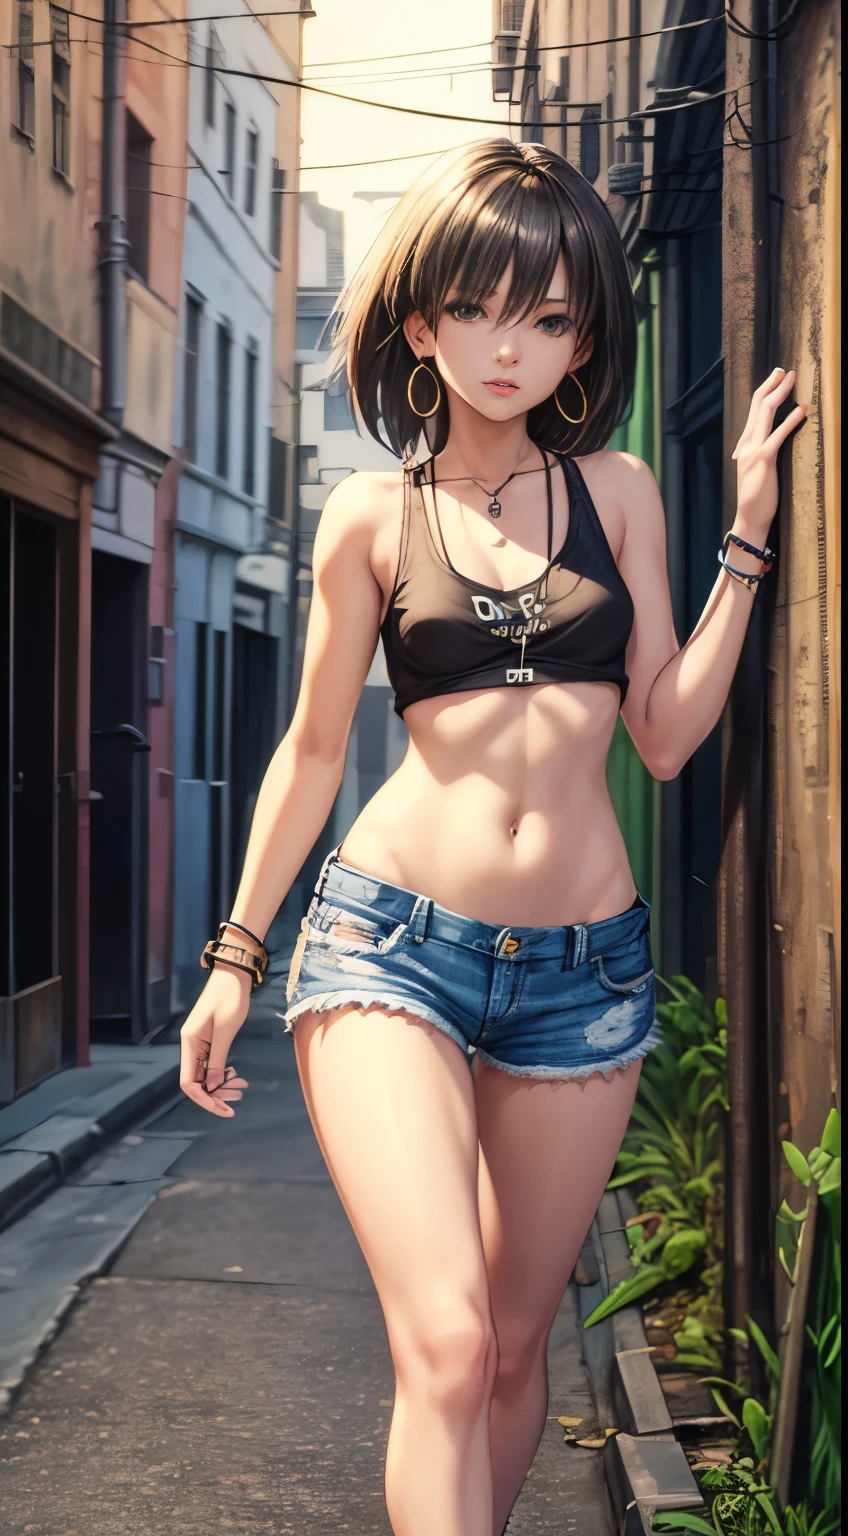 realistic photo, best possible quality, night, street with alley and graffiti on the walls, young woman, 20 years old, brunette with brown eyes, large hoop earrings, very short silver hair, perfect body, well-defined hips, nude naked small breasts, she only wears open denim shorts that show the black panties, sensual and mischievous look, makeup